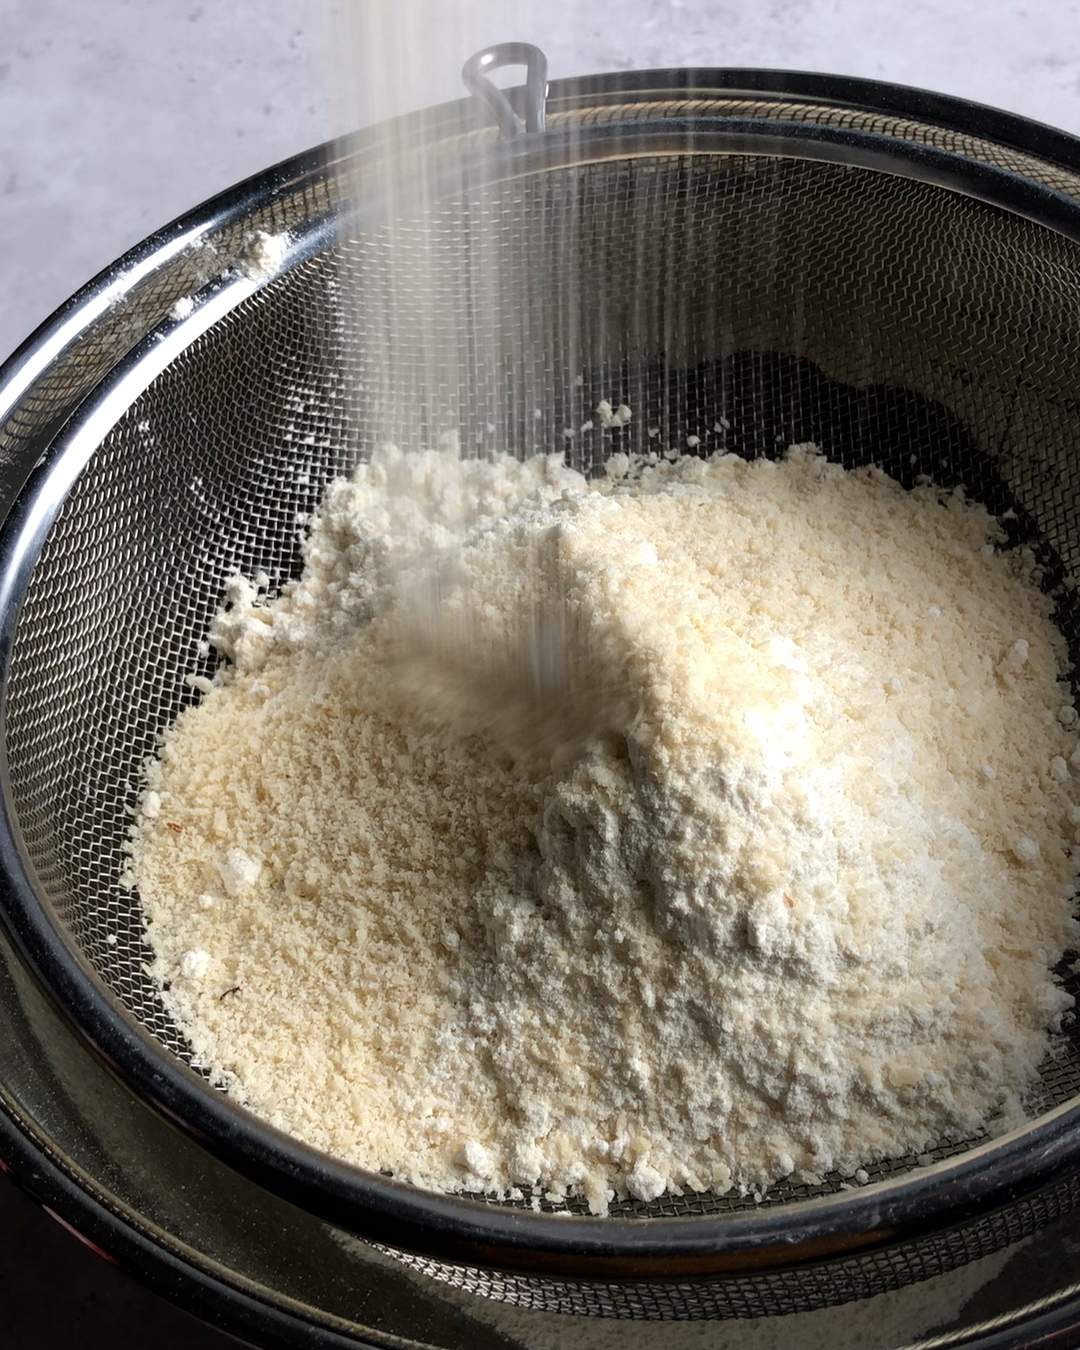 mixing dry ingredients in a sieve above a mixing bowl